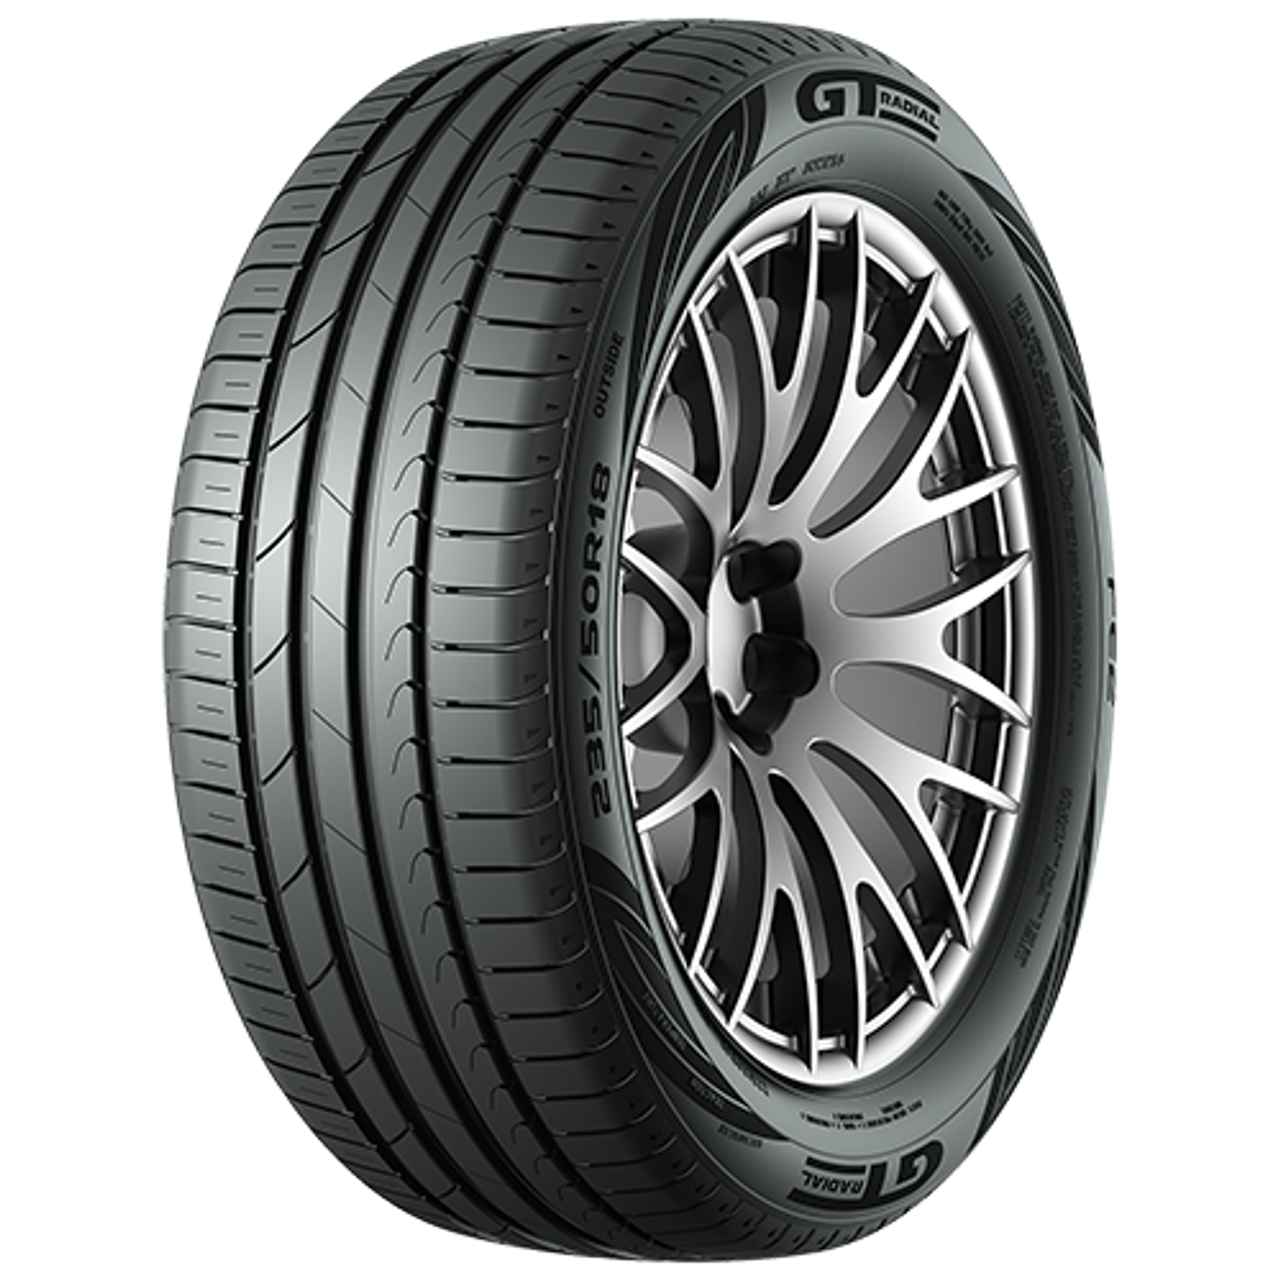 GT-RADIAL FE2 175/65R15 84T BSW